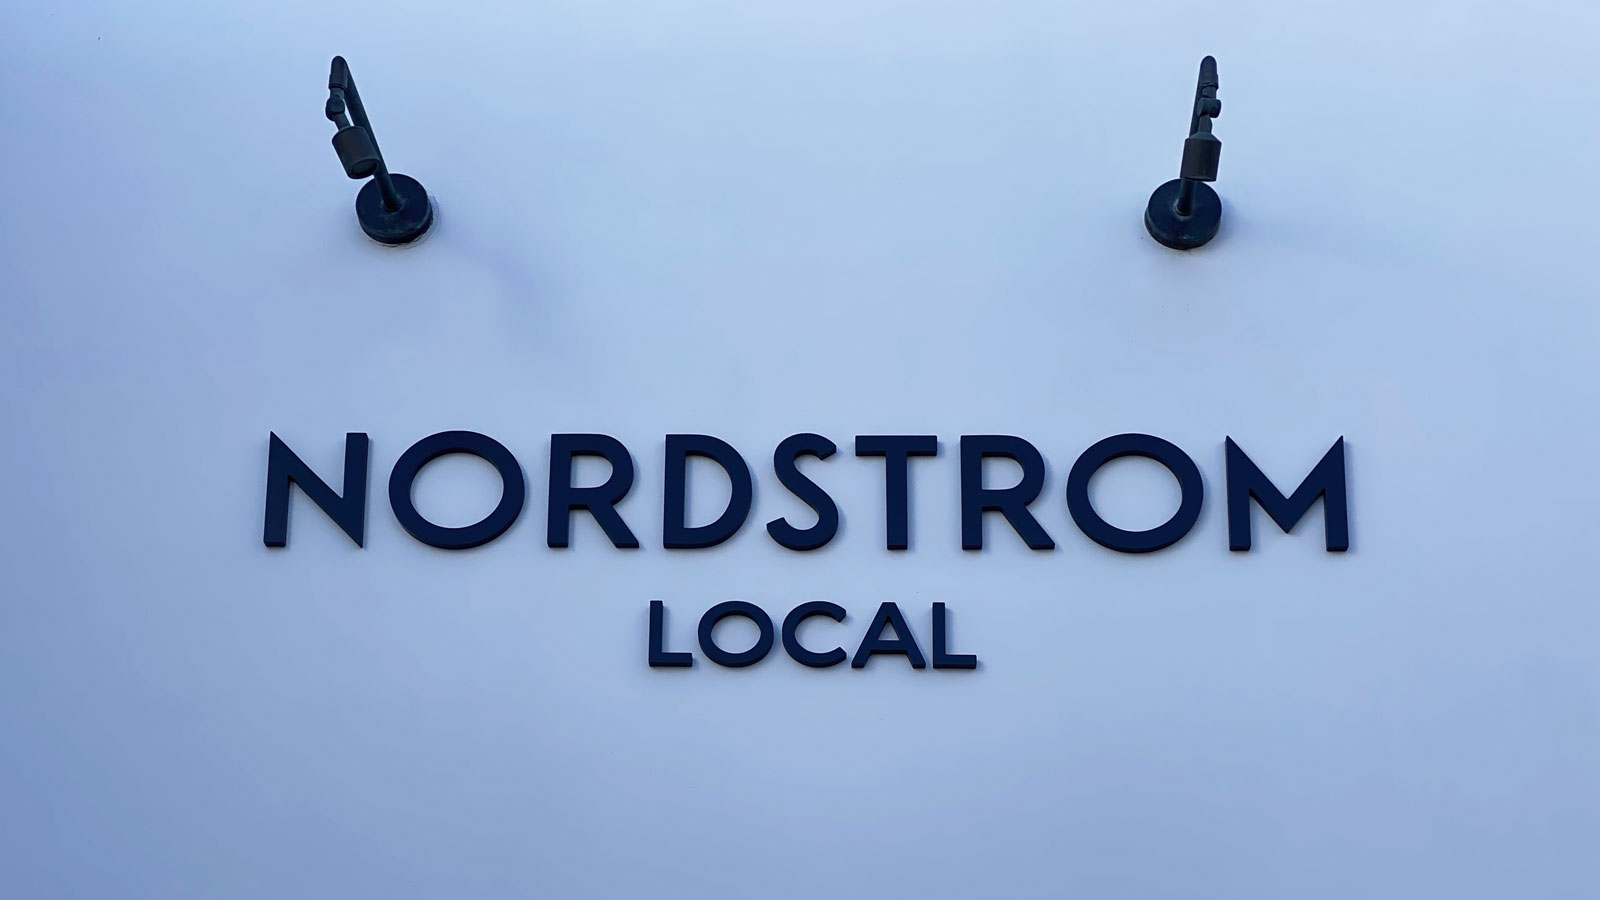 Nordstrom Local 3d plastic letters displaying the company name made of PVC